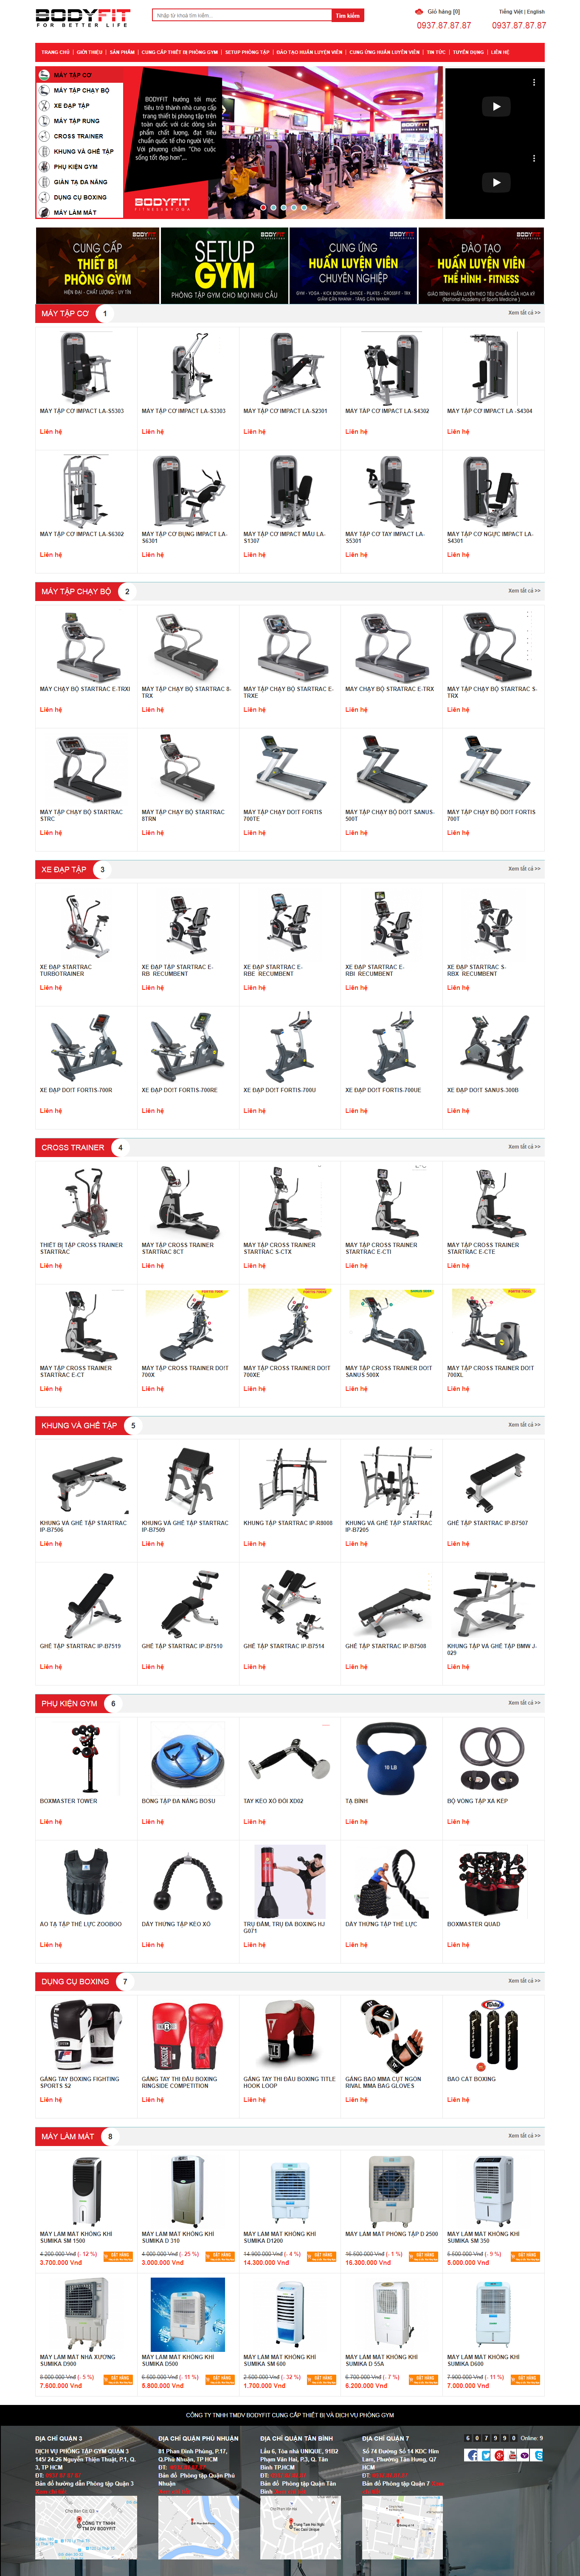 Thiết kế Website thiết bị gym - www.thietbiphongtap.com.vn